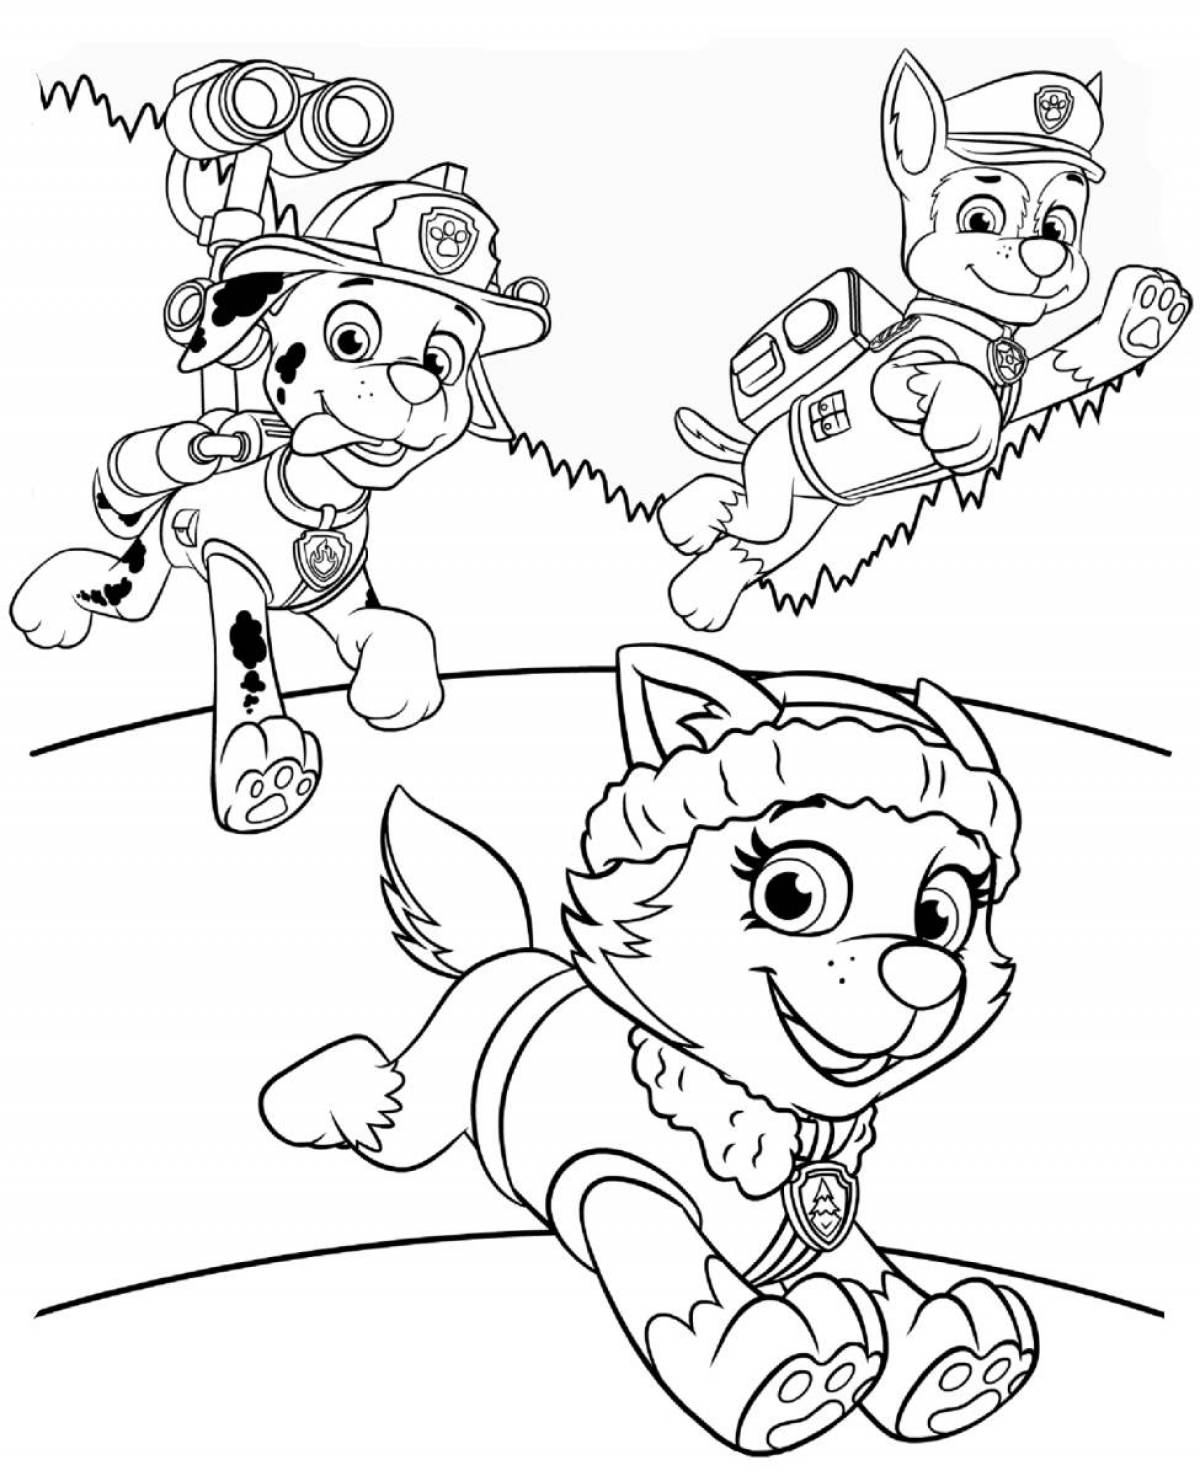 Puppy Everest Patrol Coloring Page